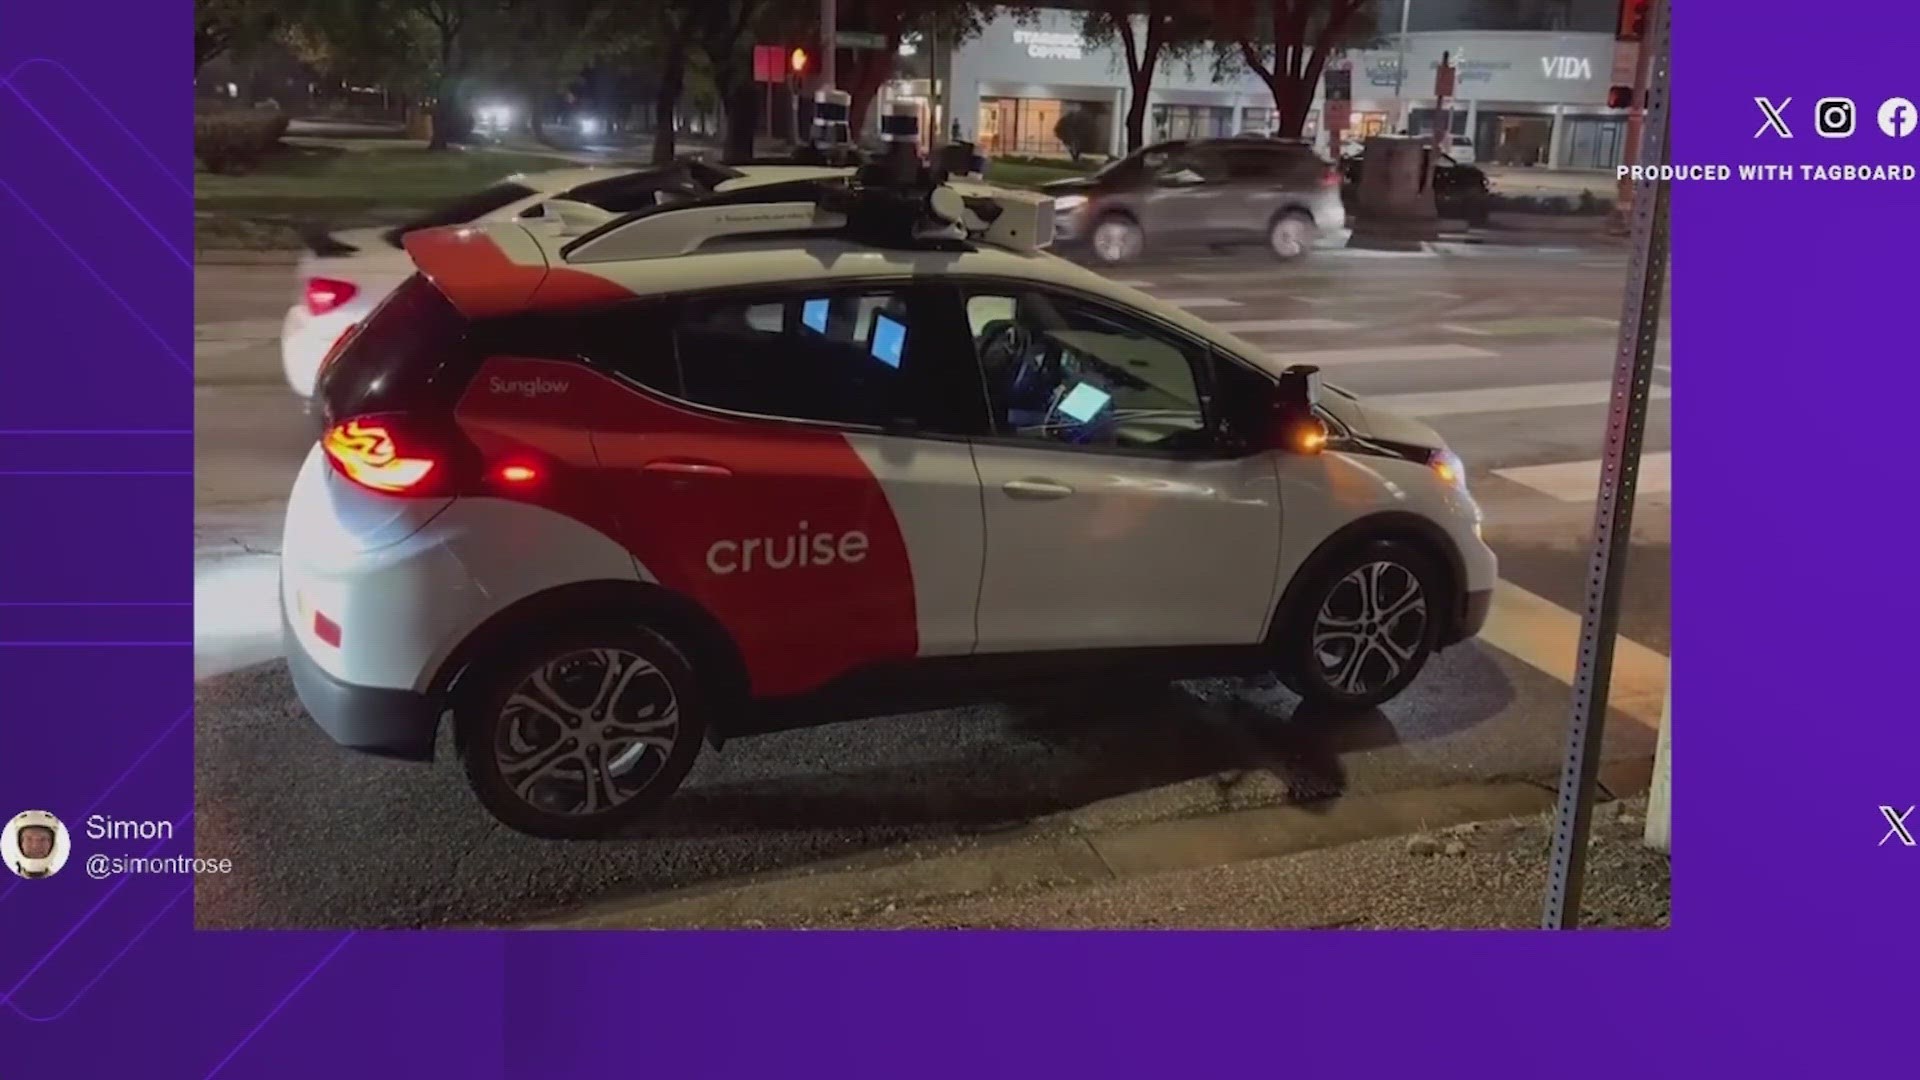 The ride-hailing company Cruise said a traffic light at Montrose and Hawthorne was stuck on red, causing a few vehicles to stop at the intersection for a few minutes